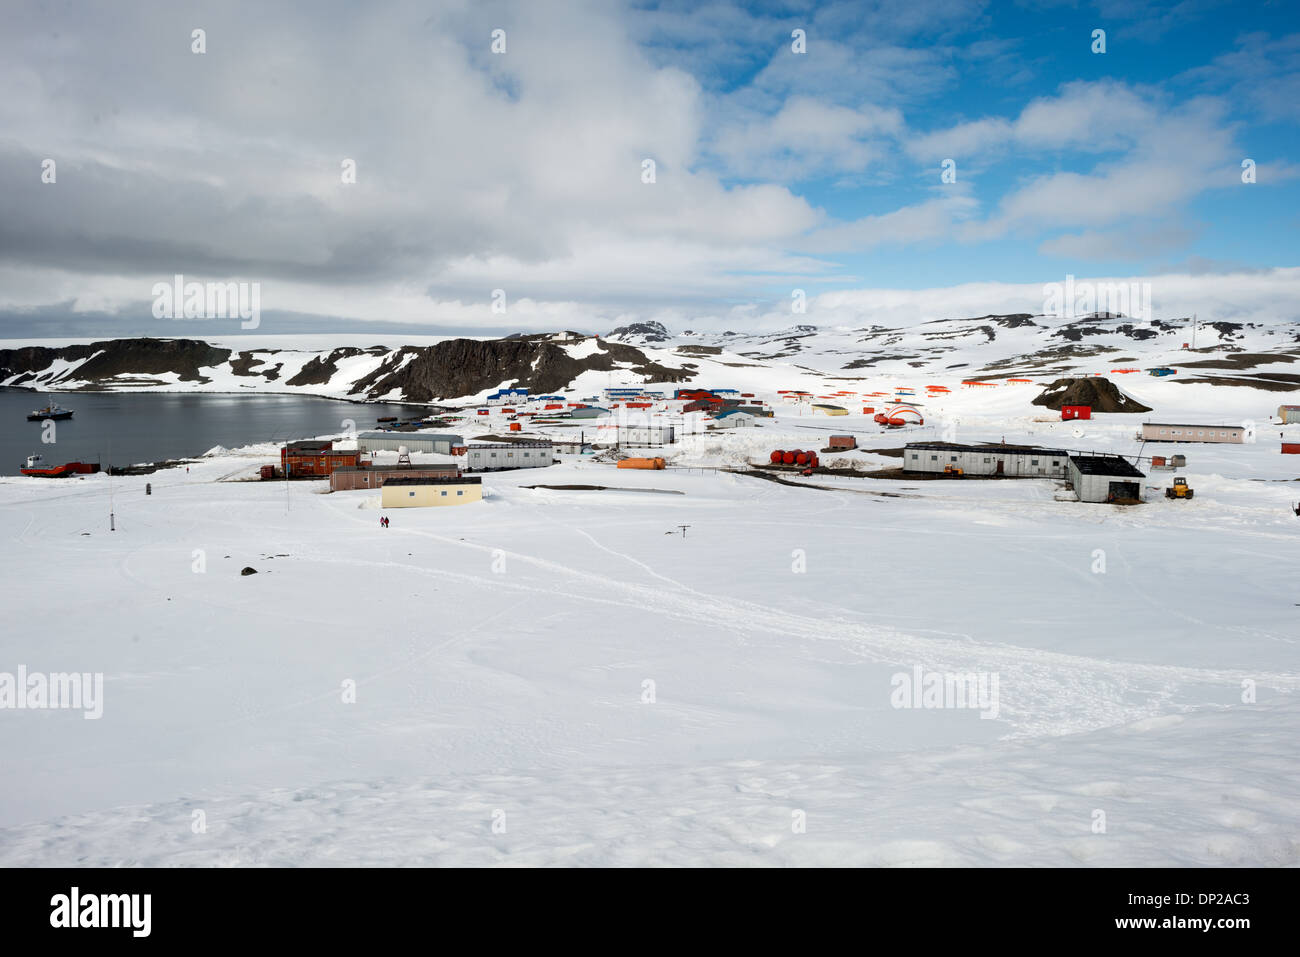 ANTARCTICA - An elevated view of Bellingshausen Station and Frei Base on King George Island in Antarctica. Stock Photo